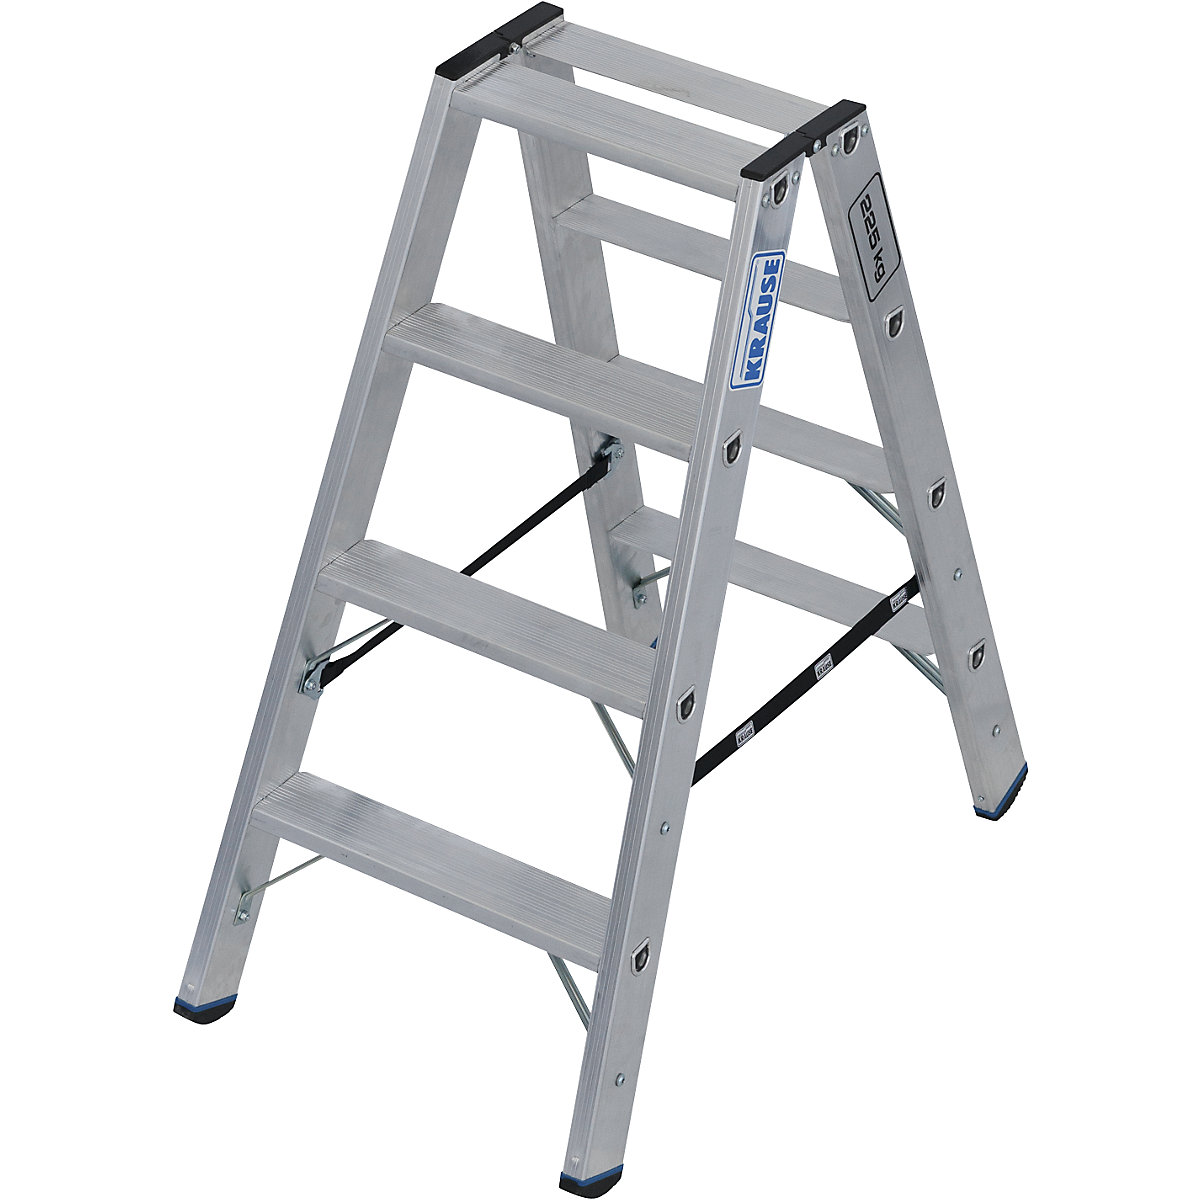 Heavy duty step ladder – KRAUSE, double sided access, up to 225 kg, 2x4 steps-1